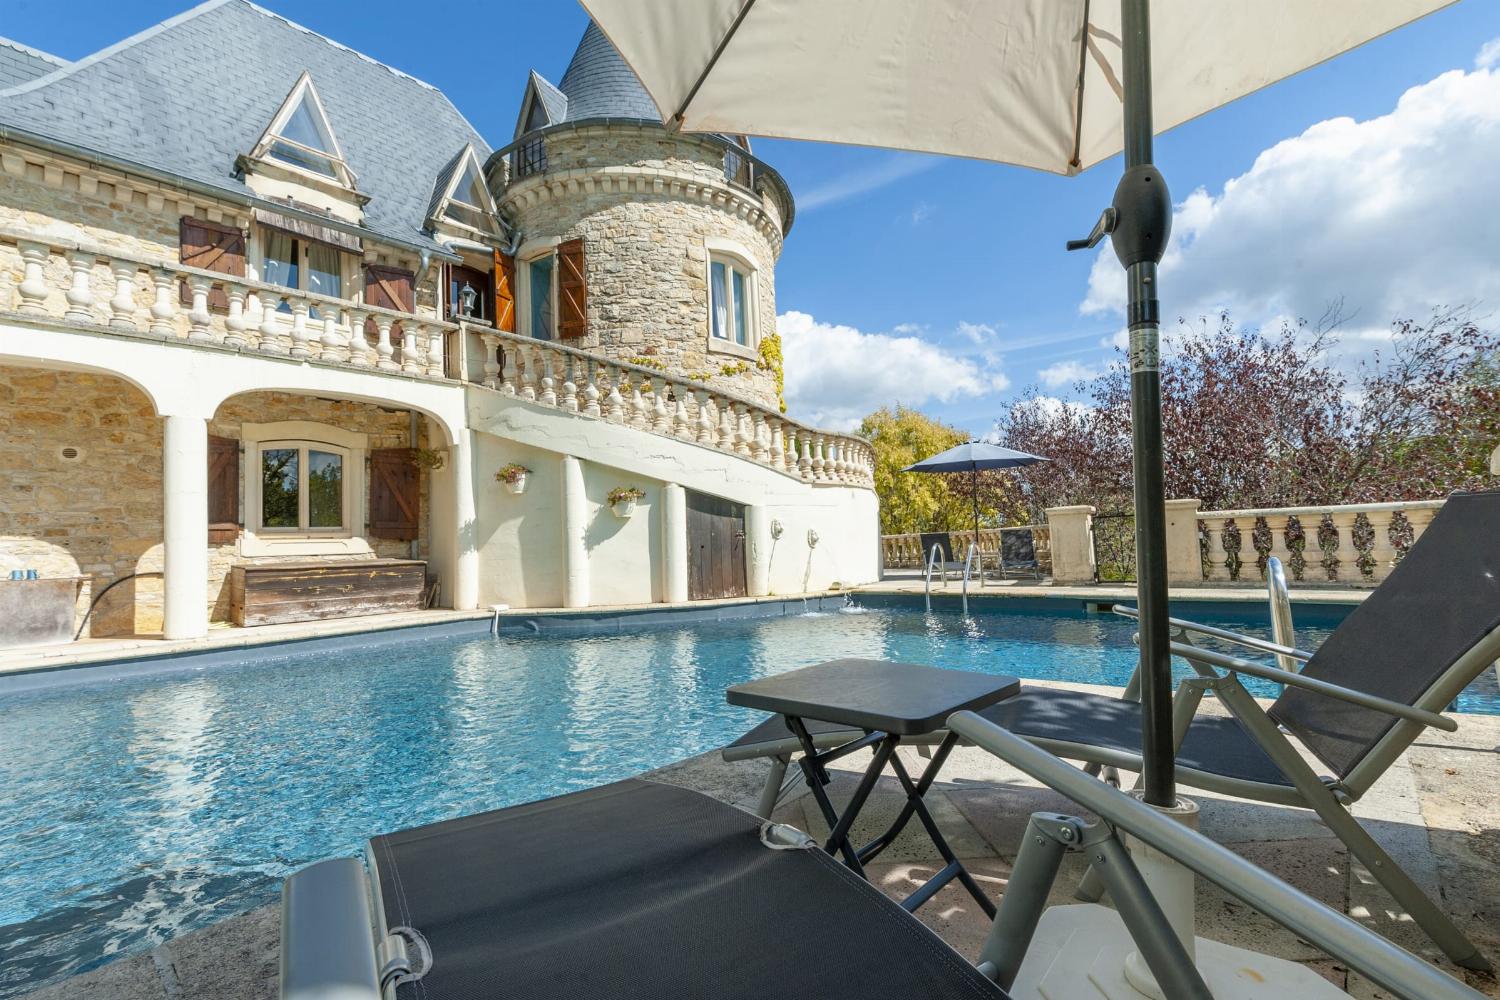 Holiday château in the Lot with private heated pool